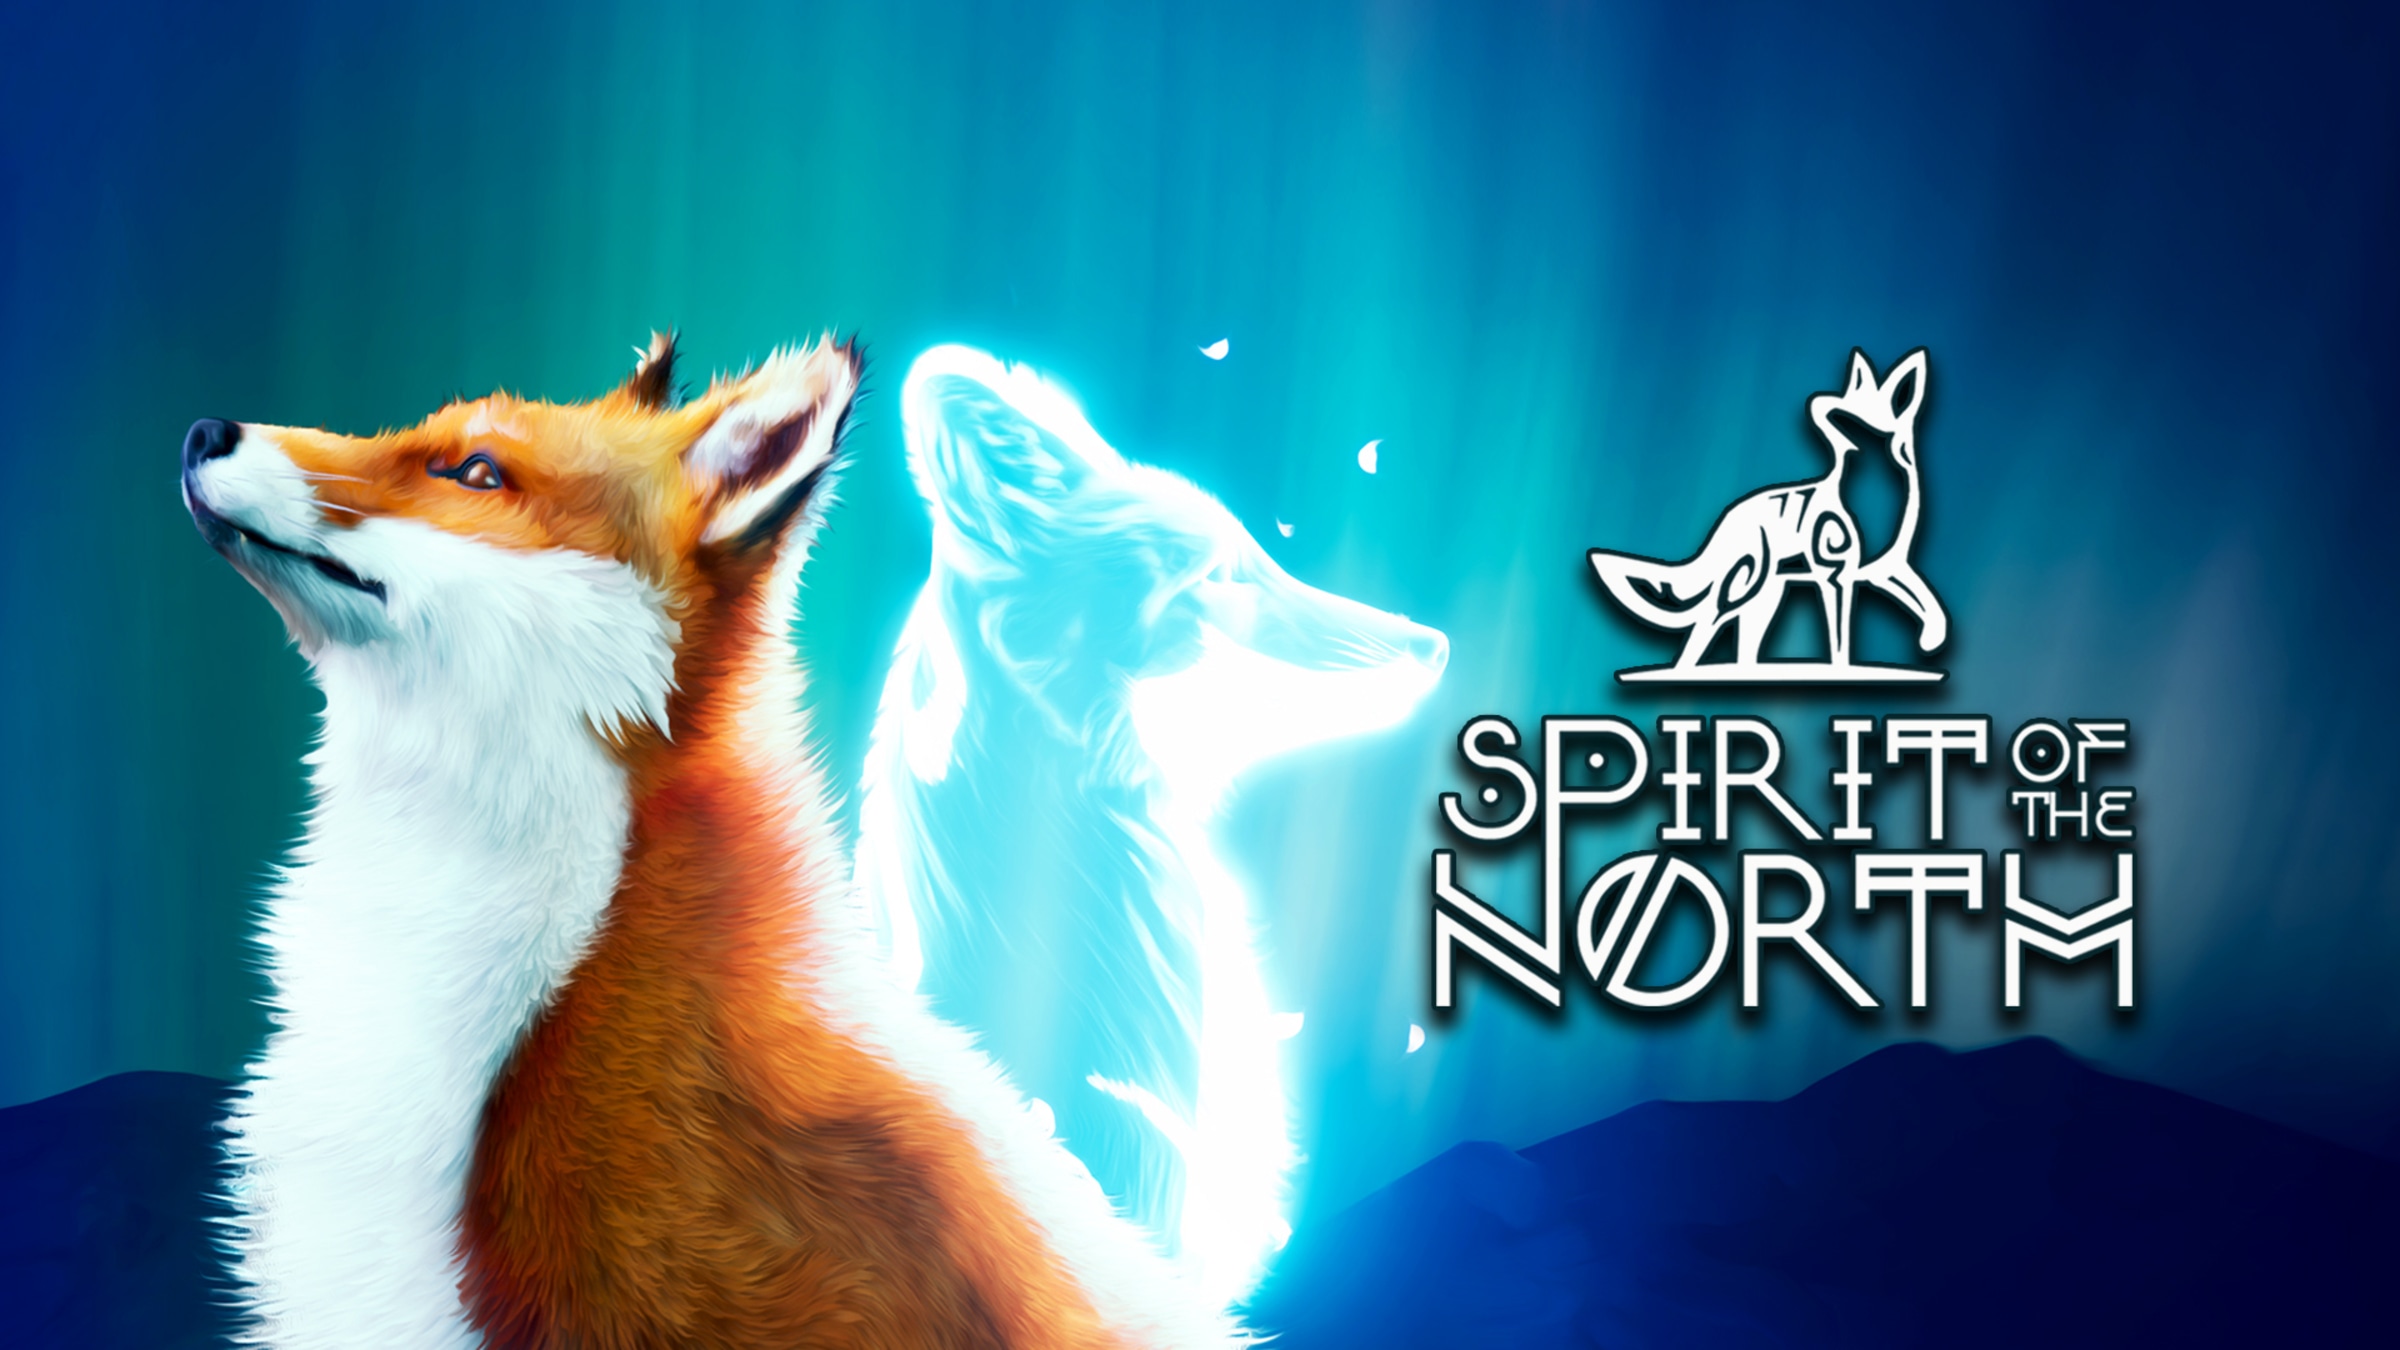 Spirit of the North for Nintendo Switch - Nintendo Official Site